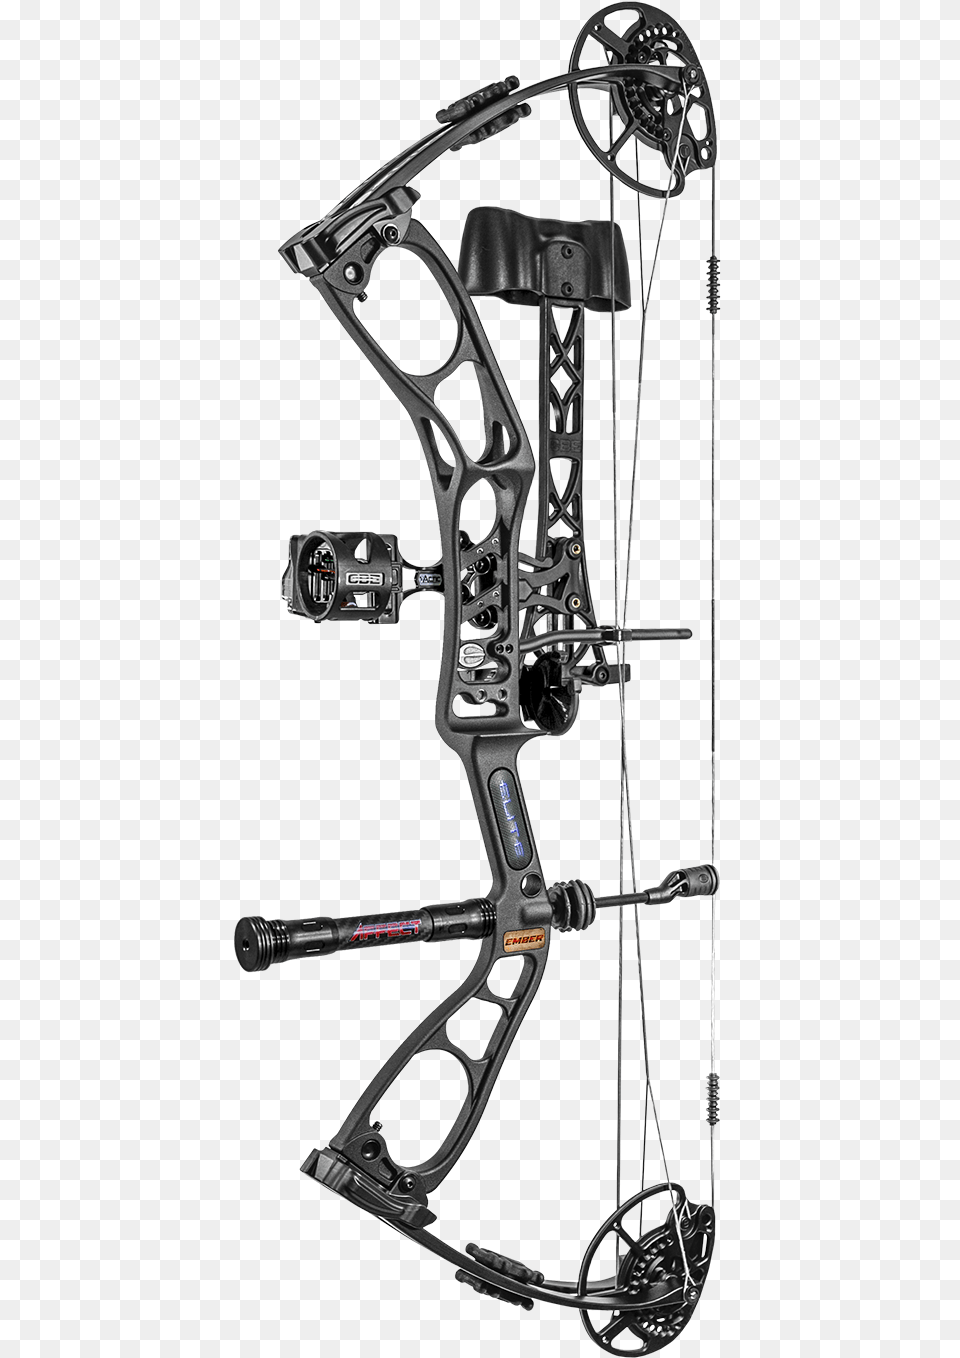 Elite Archery Makers Of The Worlds Most Shootable Bows 2019 Elite Bows Ritual 30, Weapon, Bow, Machine, Wheel Png